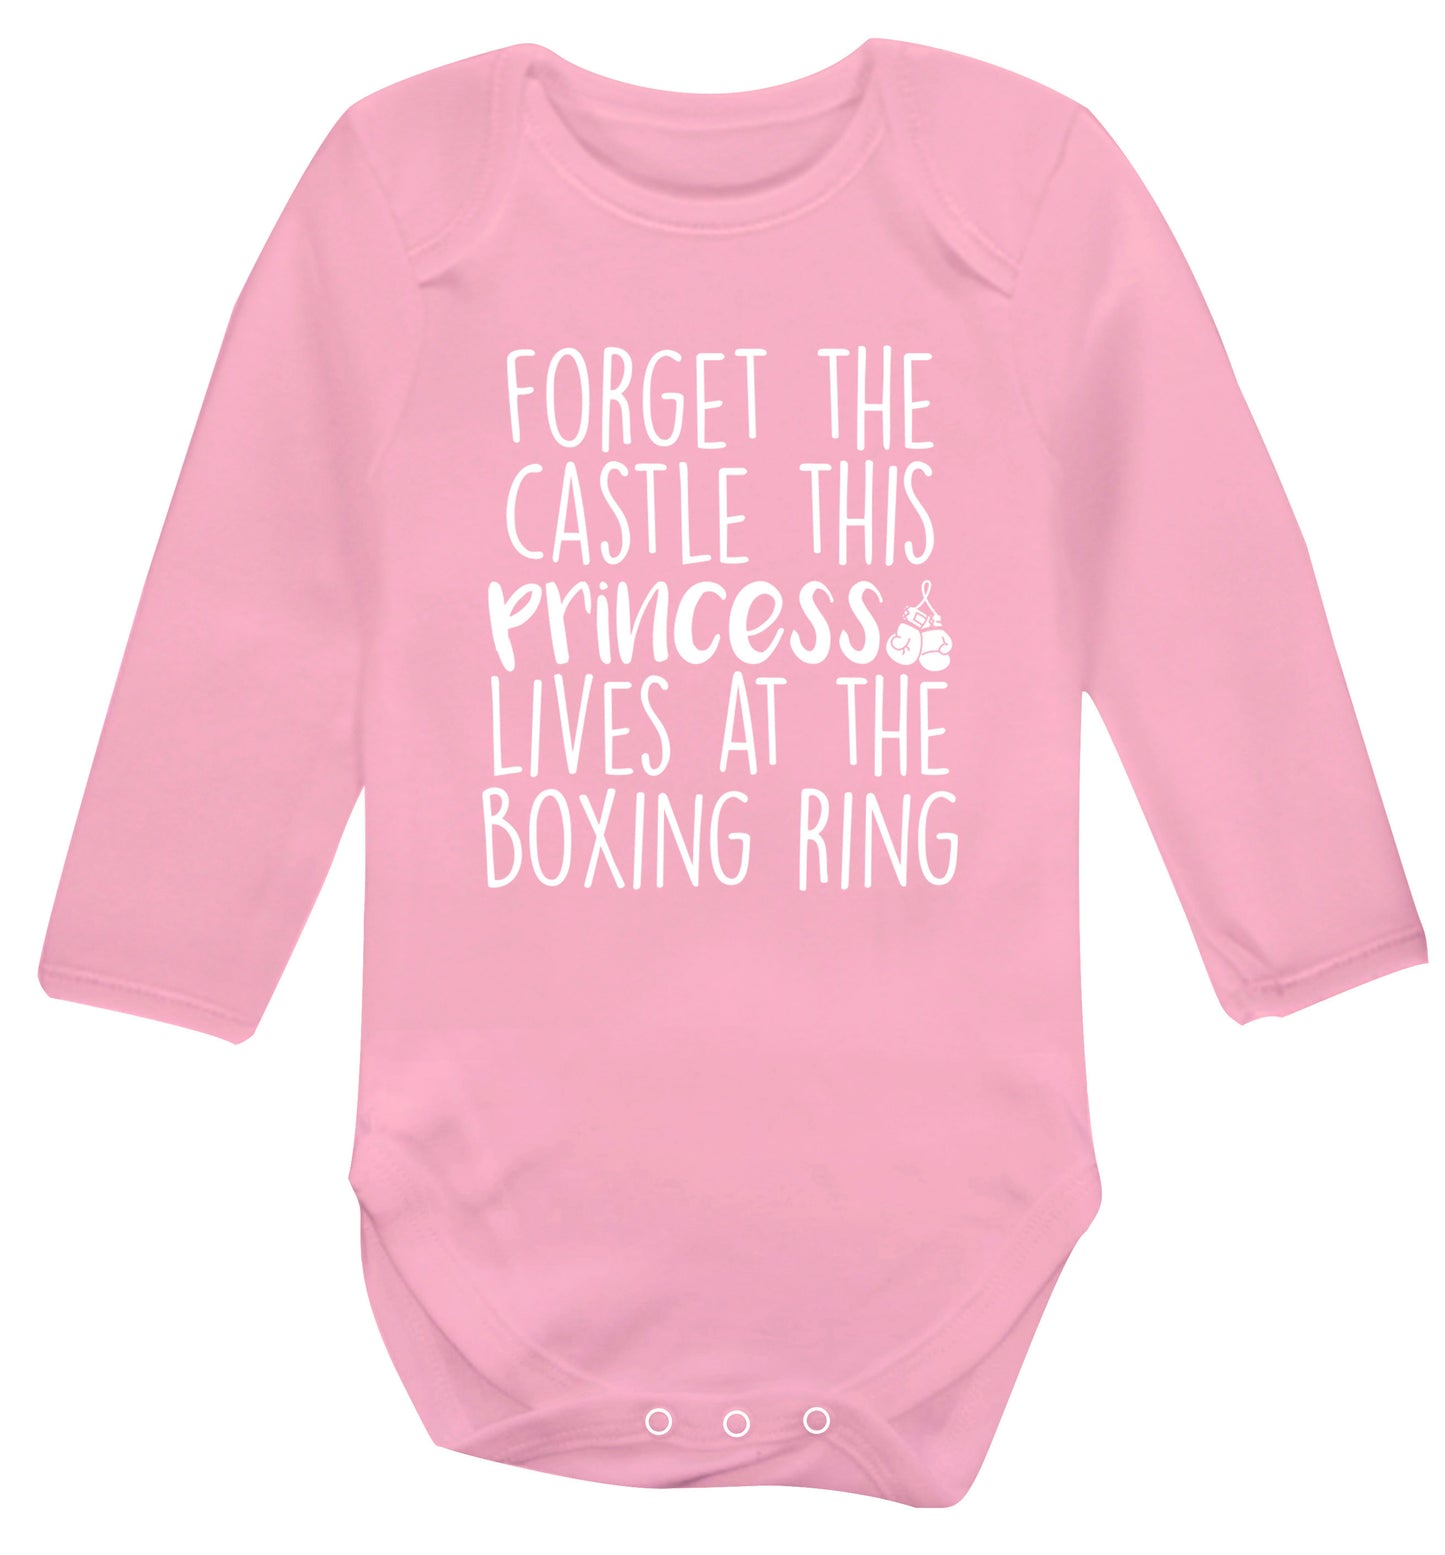 Forget the castle this princess lives at the boxing ring Baby Vest long sleeved pale pink 6-12 months